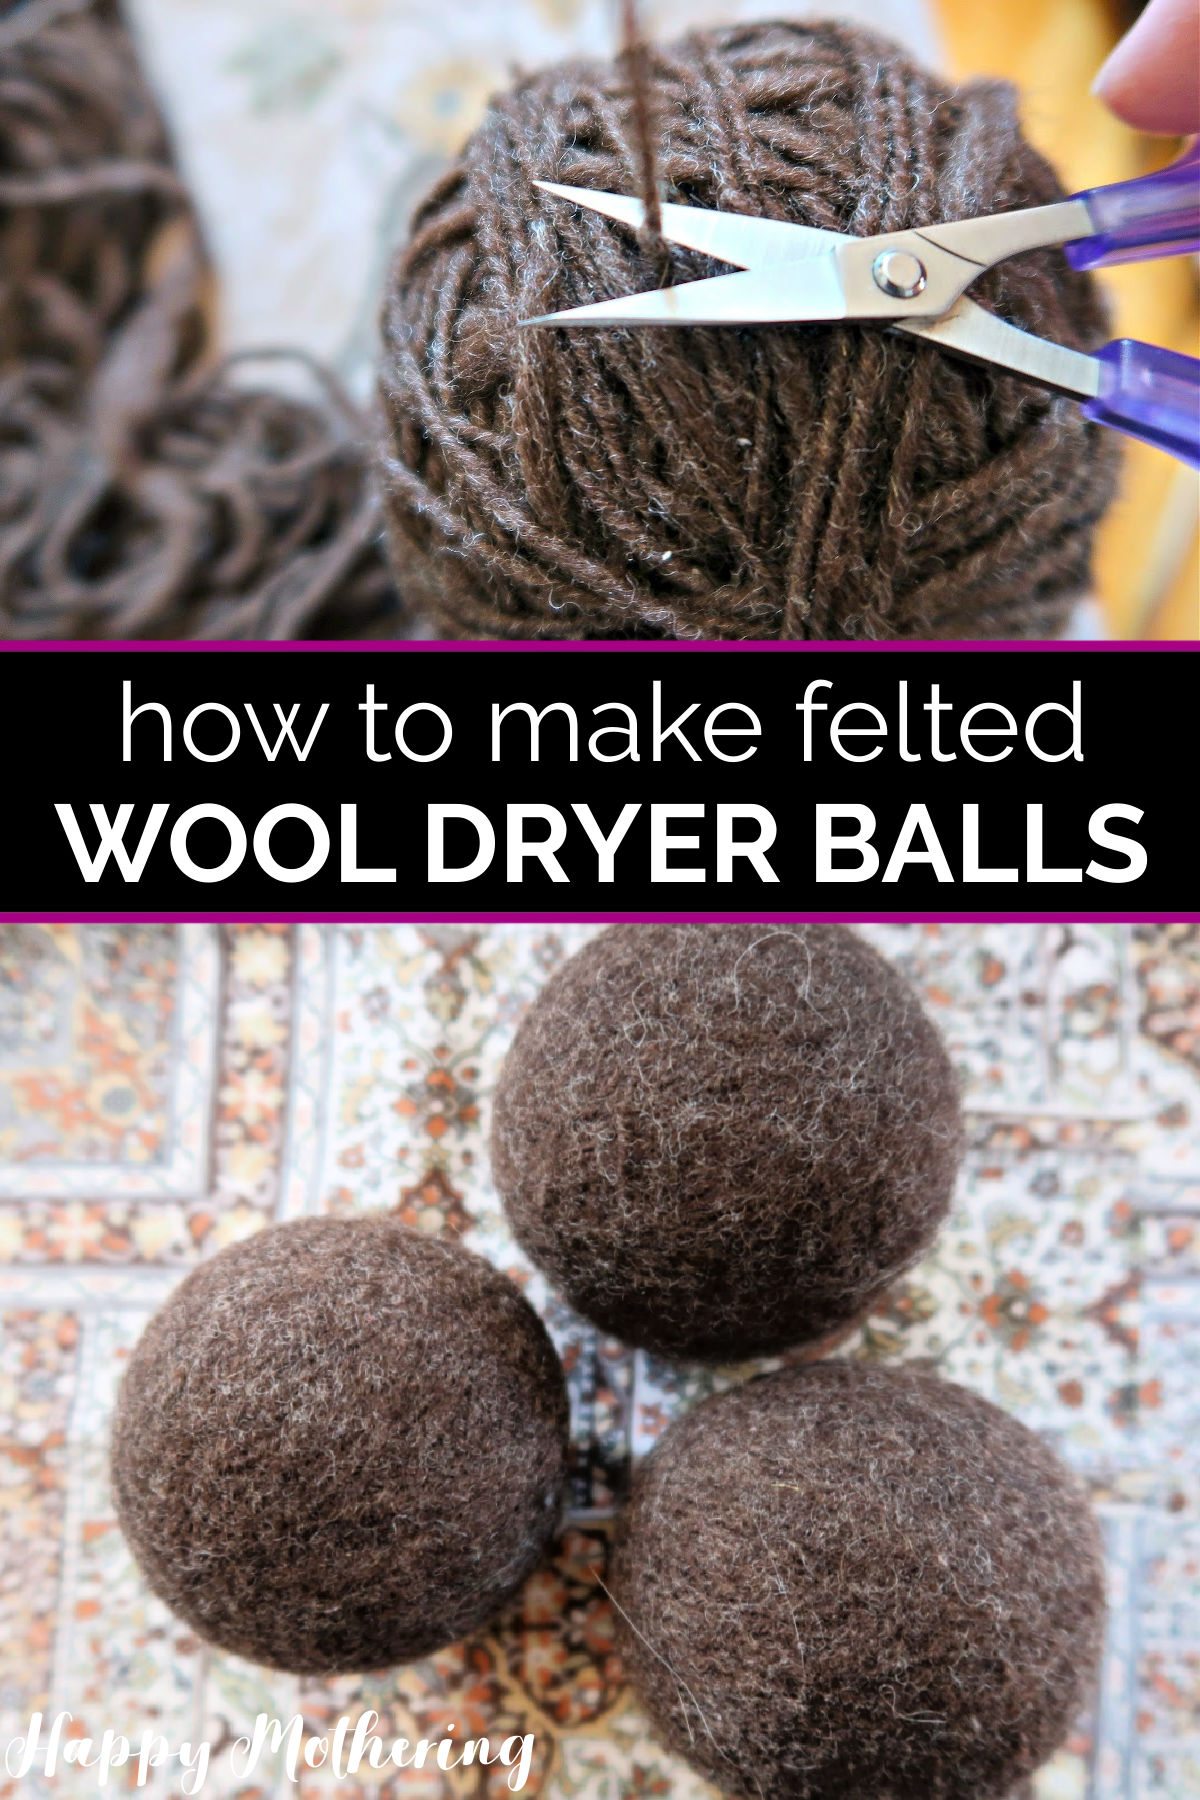 Yarn ball being trimmed off displayed above three fully felted wool dryer balls.